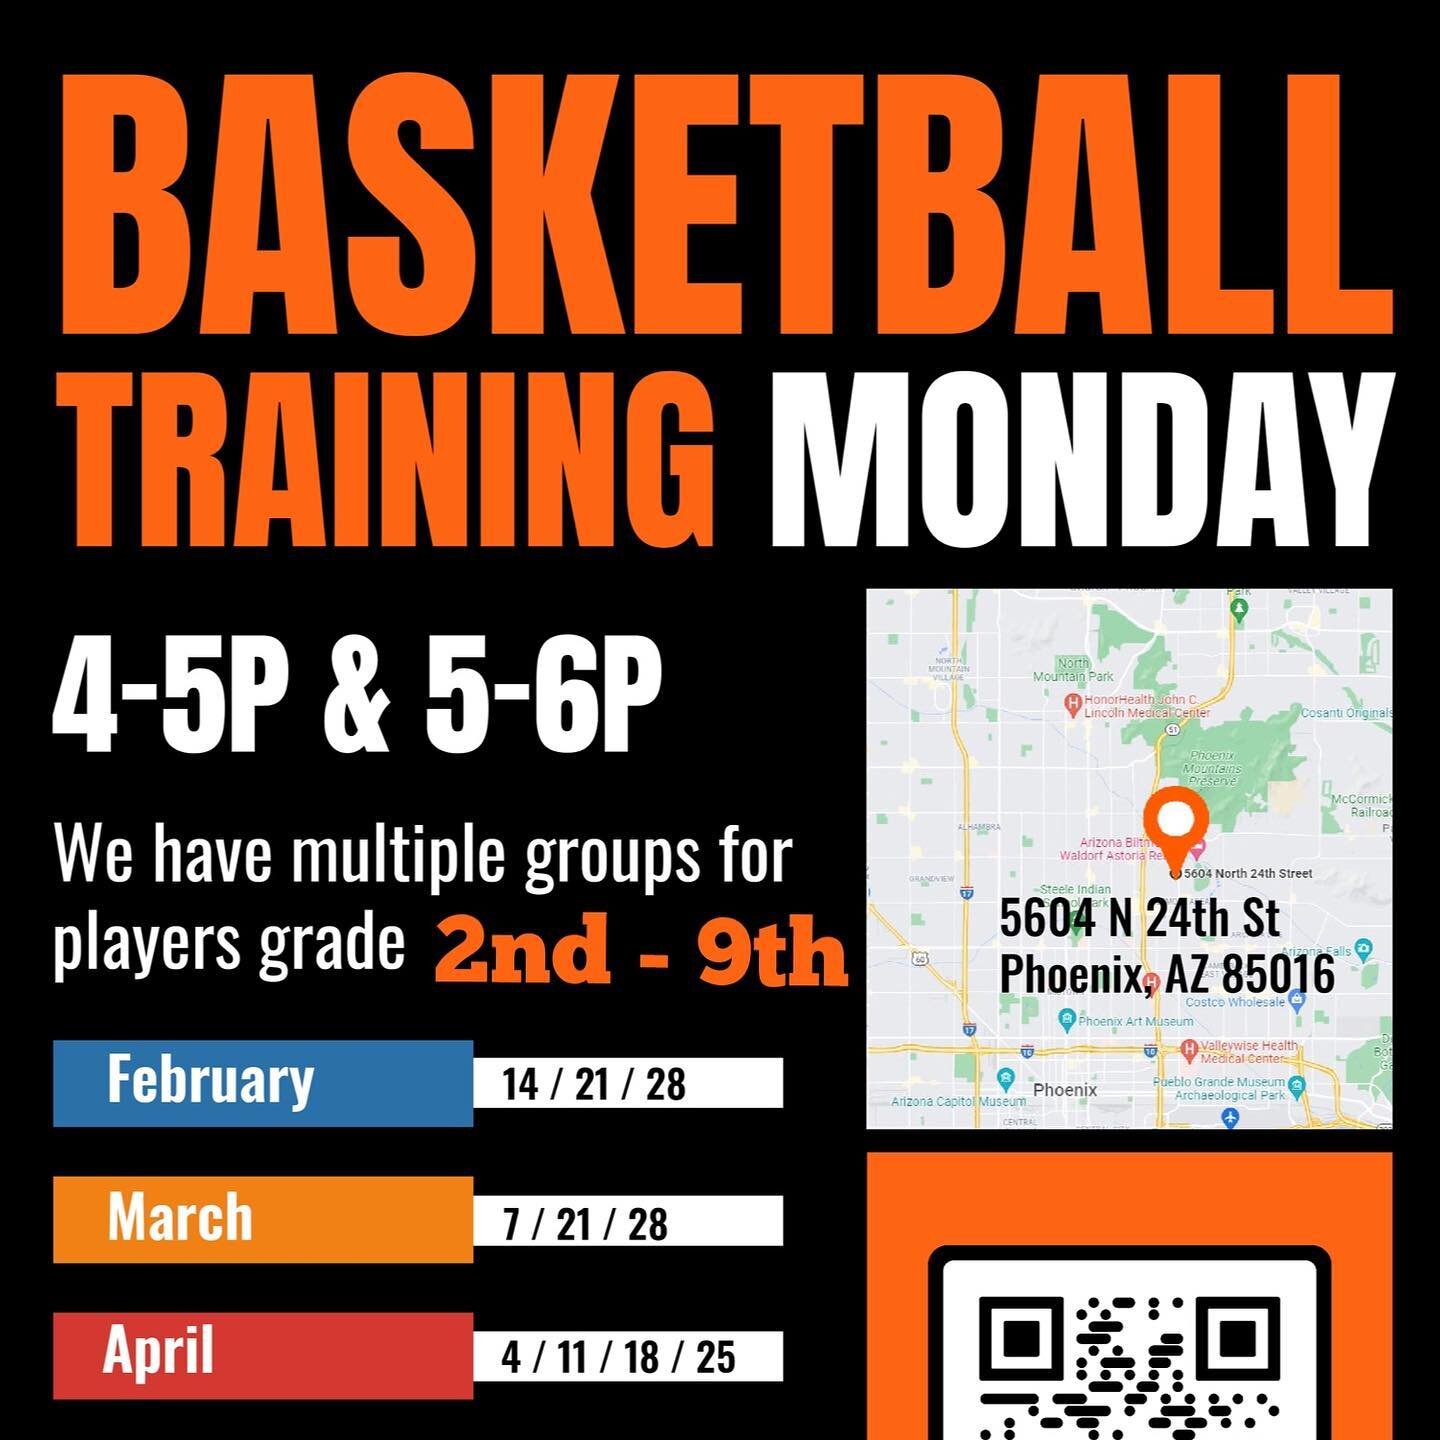 DM us, text us 602-345-1783 or drop in to get started 🏀